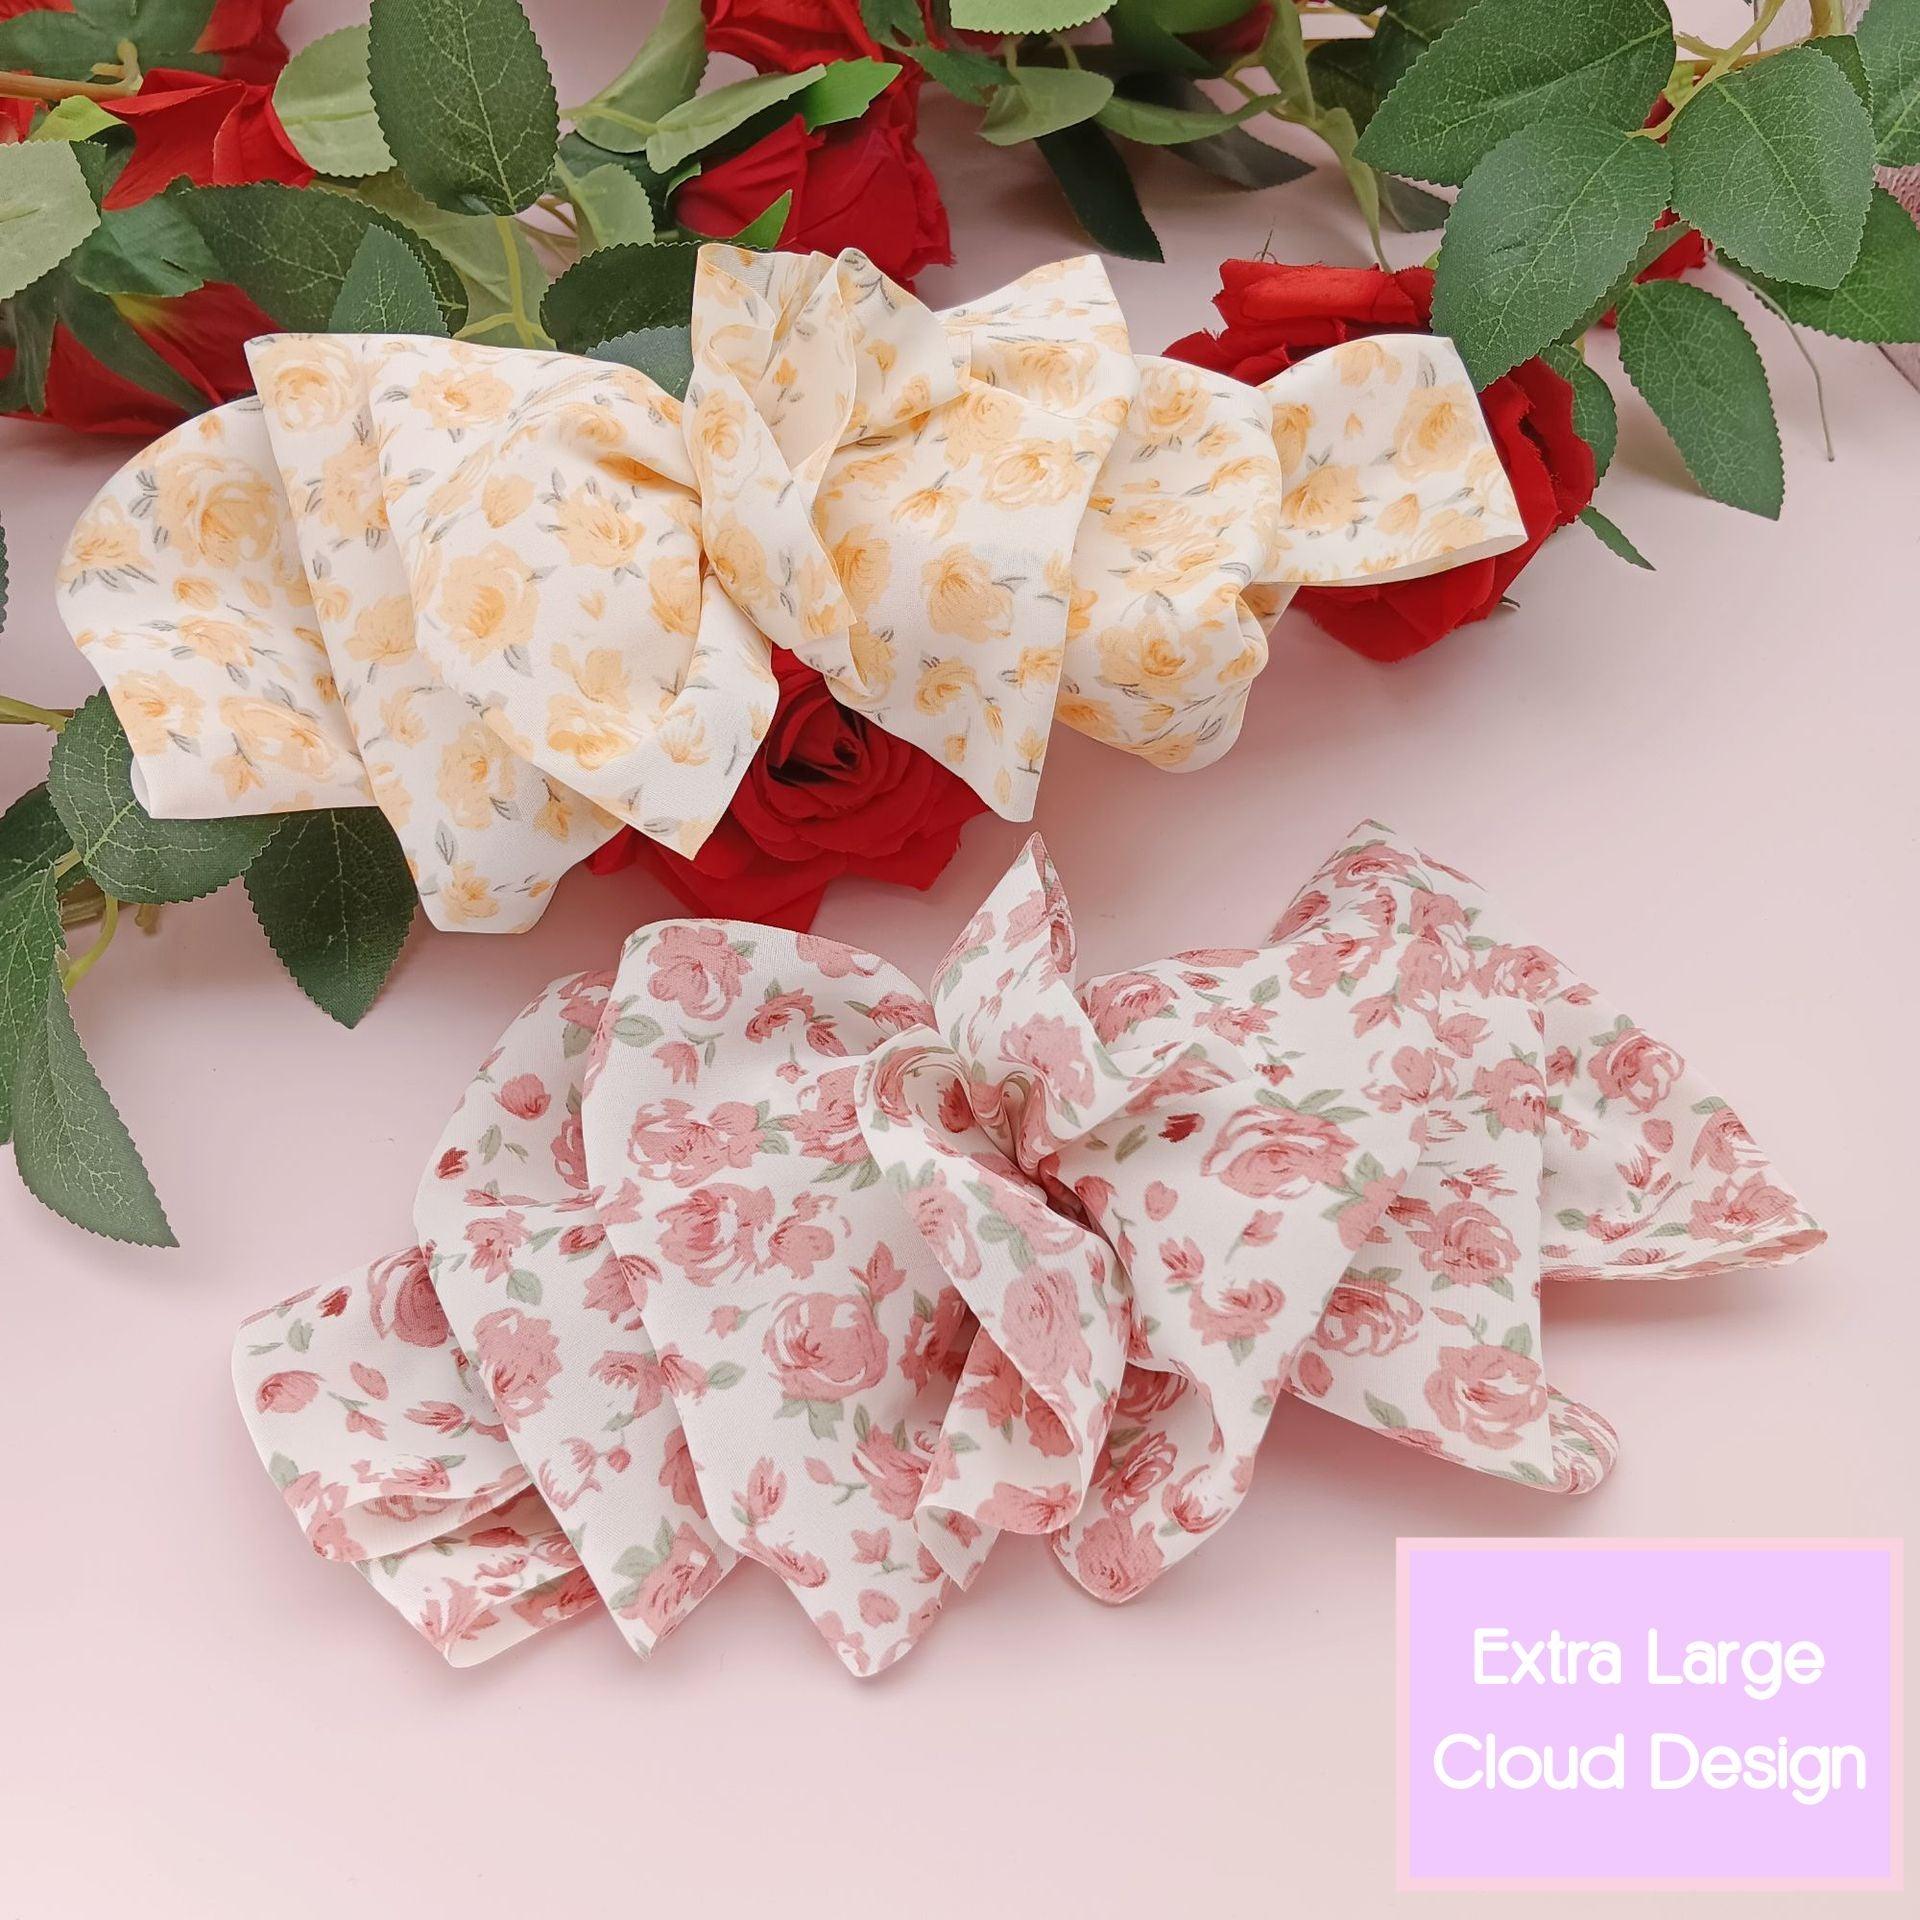 1 PCS Extra Large Floral Cloud Style Hair Bow Hair Clip - Belle Rose Nails